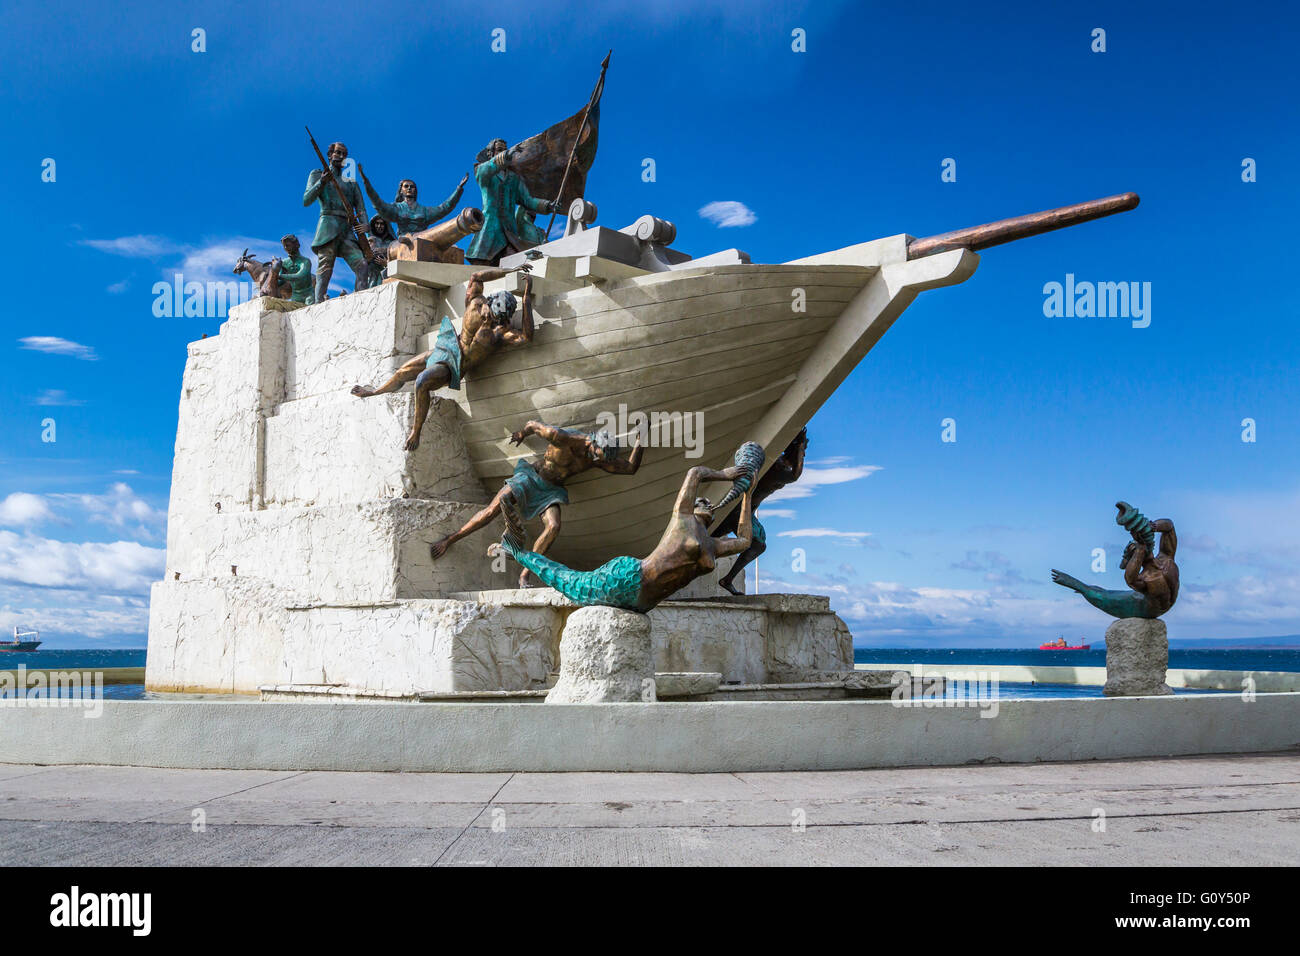 The monument to the Ancud schooner in Punta Arenas, Chile, Patagonia, South America. Stock Photo